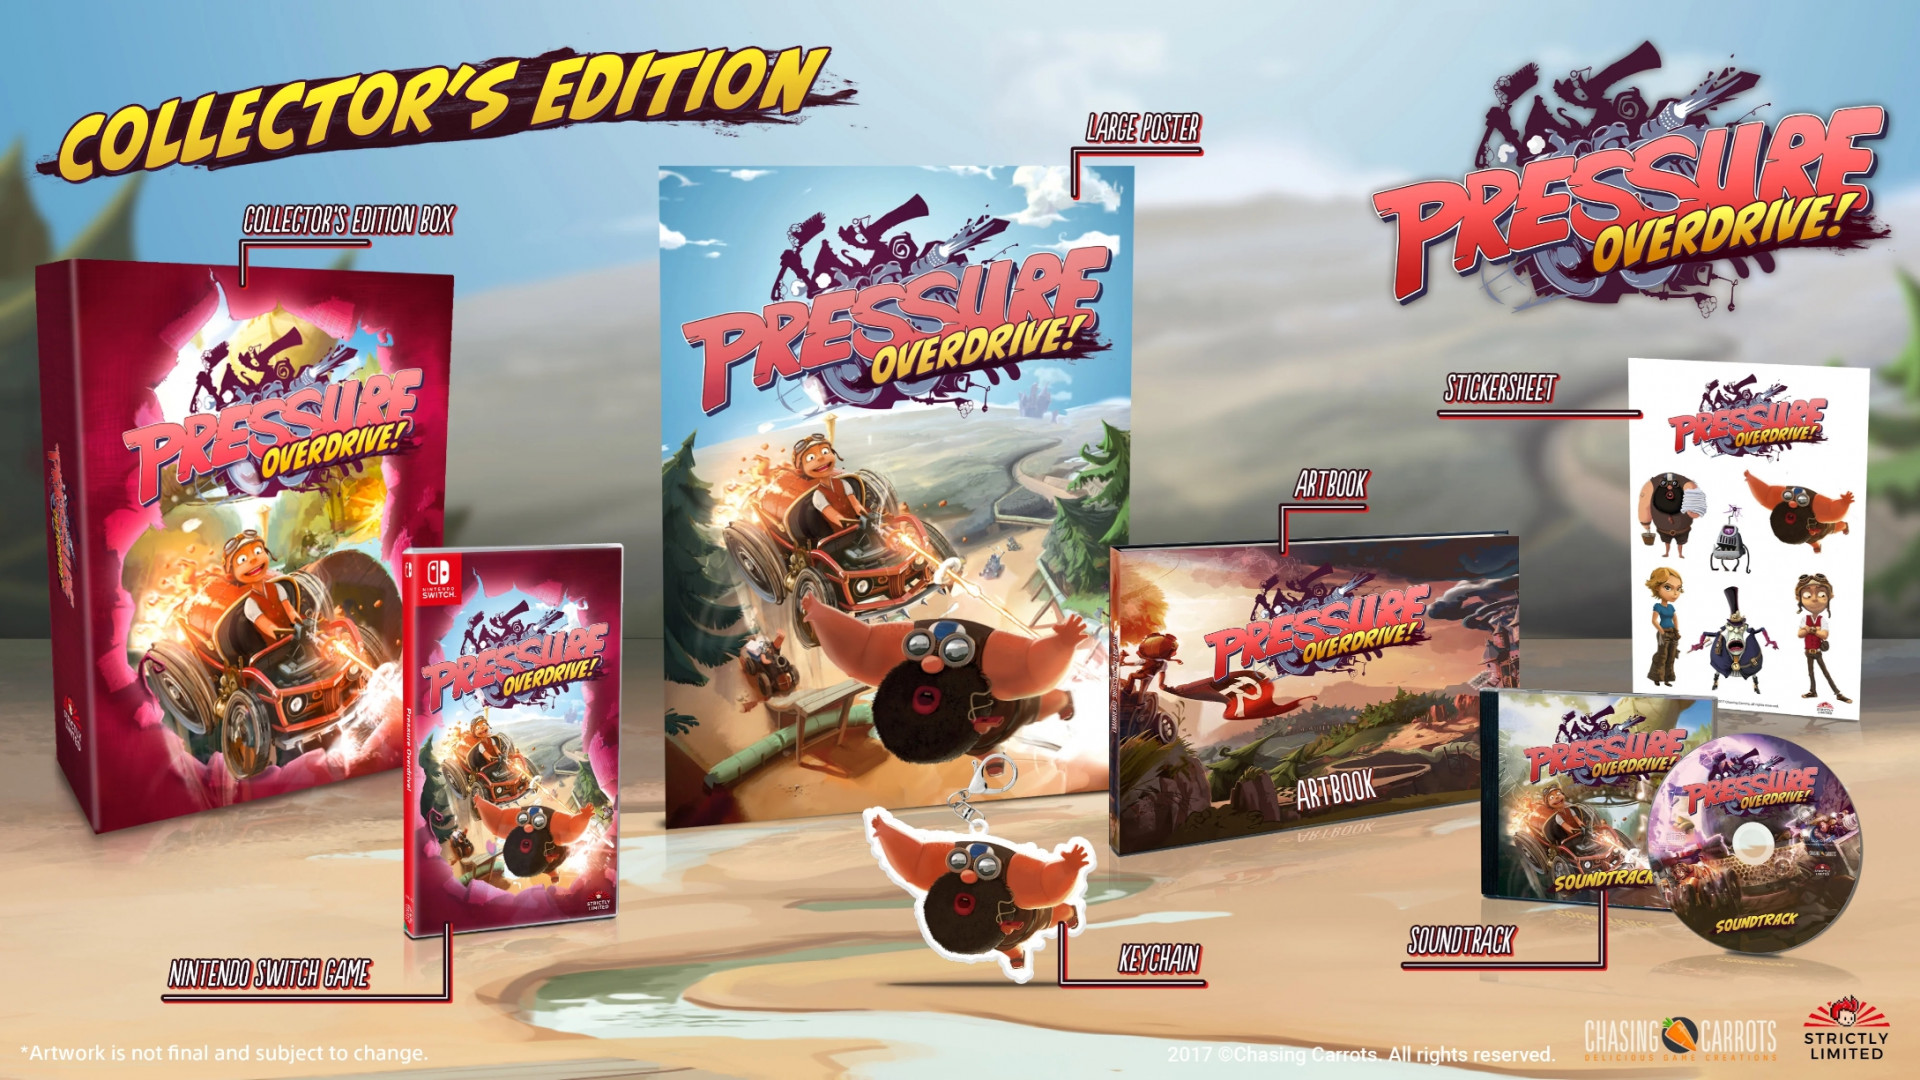 Pressure Overdrive! Collector's Edition